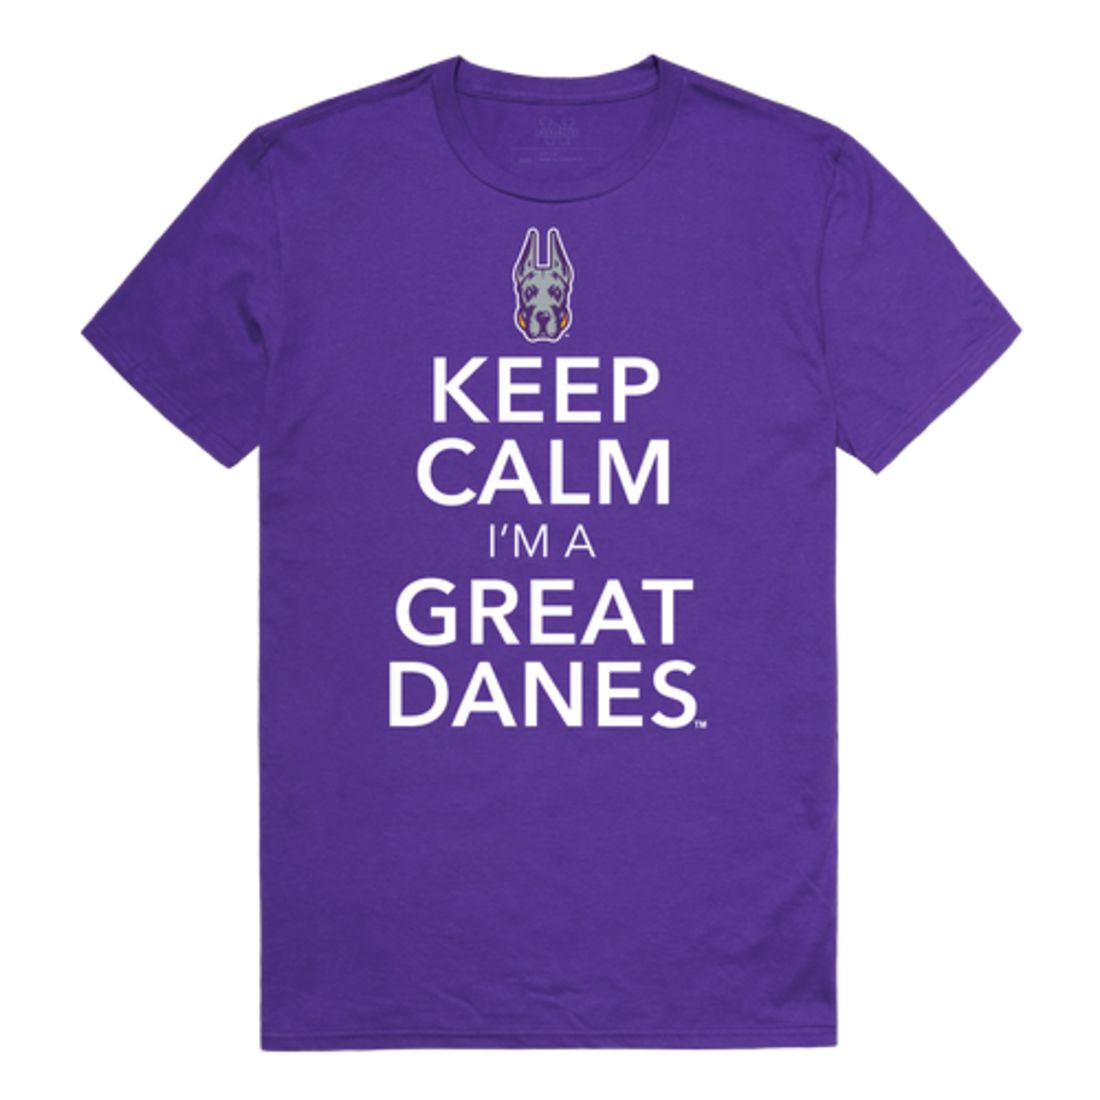 UAlbany University of Albany The Great Danes Keep Calm T-Shirt